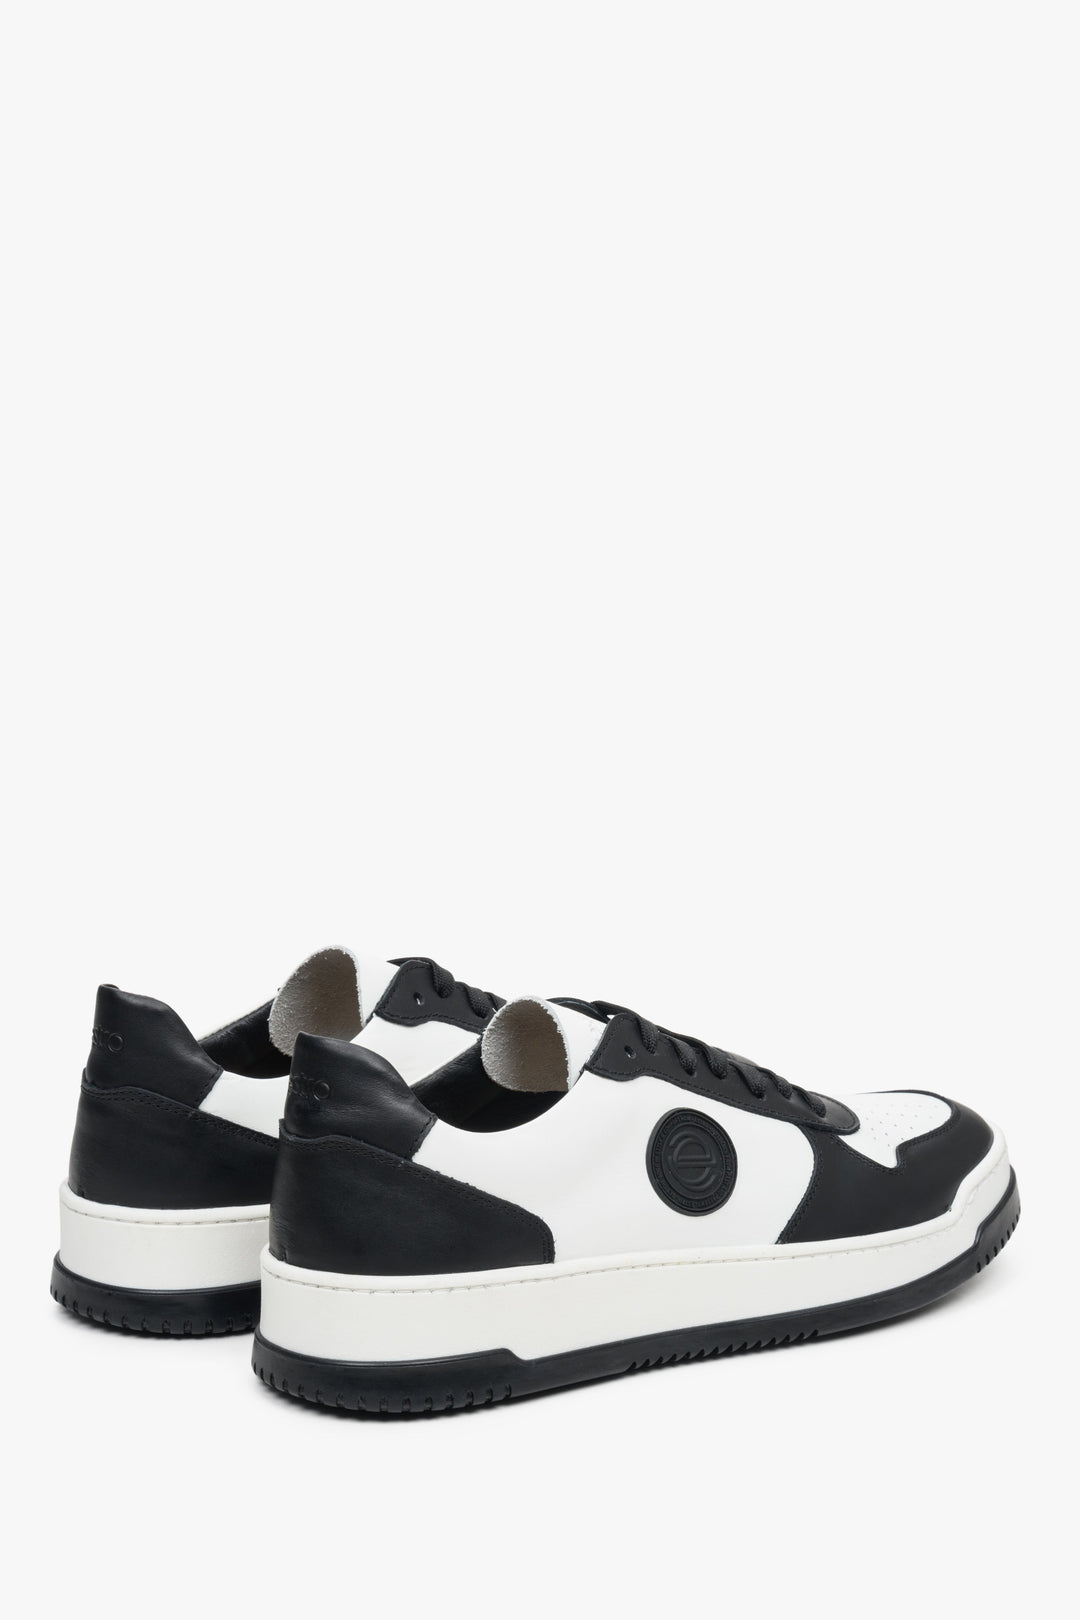 Men's sneakers for spring made of 100% Italian leather in black and white.